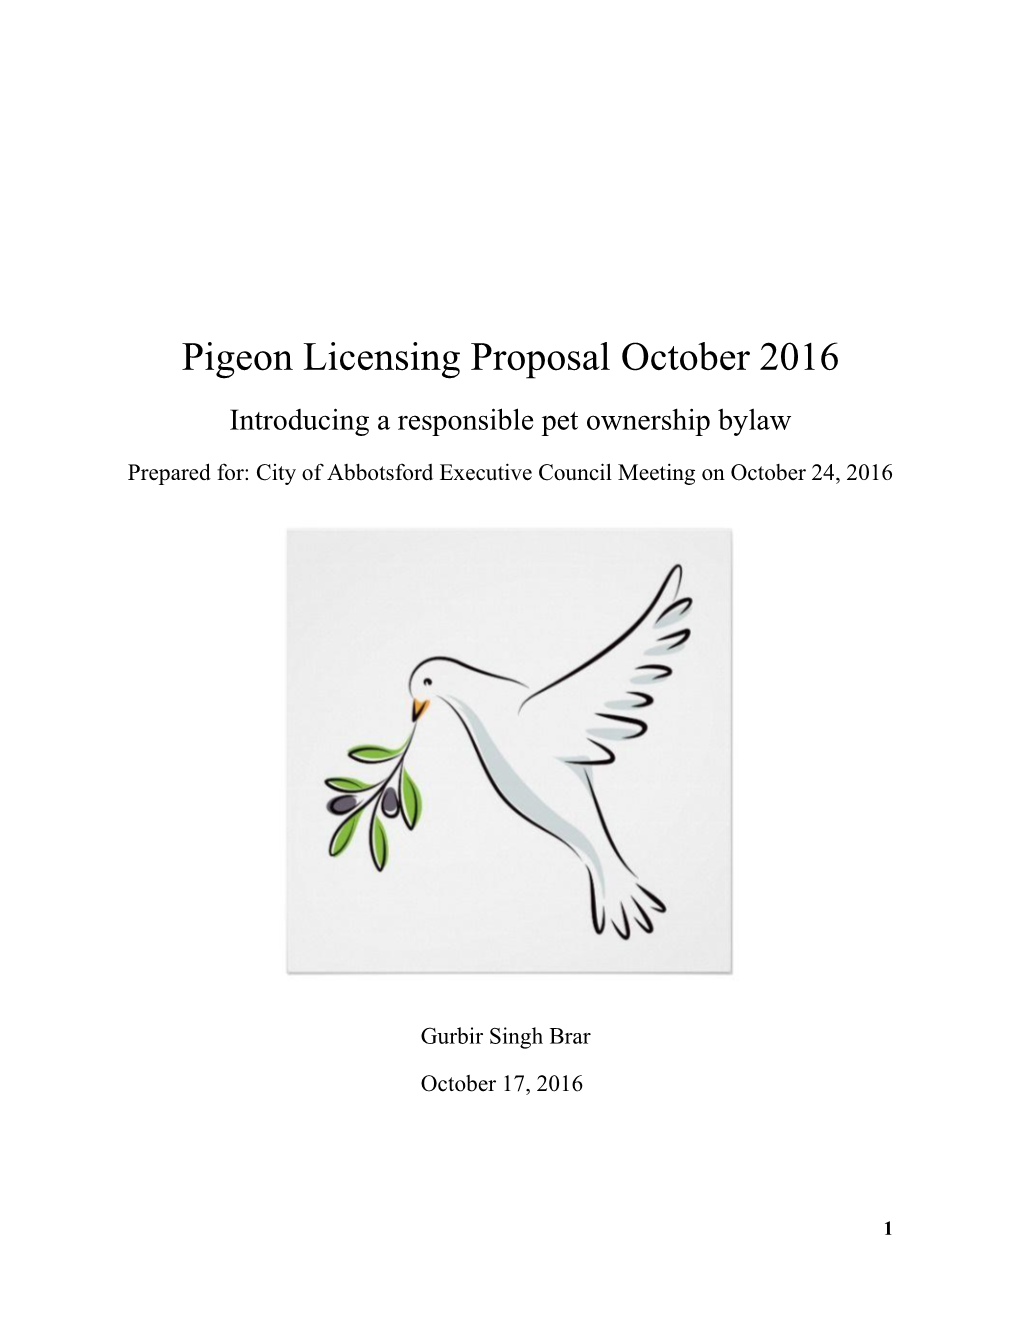 Pigeon Licensing Proposal October 2016 Introducing a Responsible Pet Ownership Bylaw